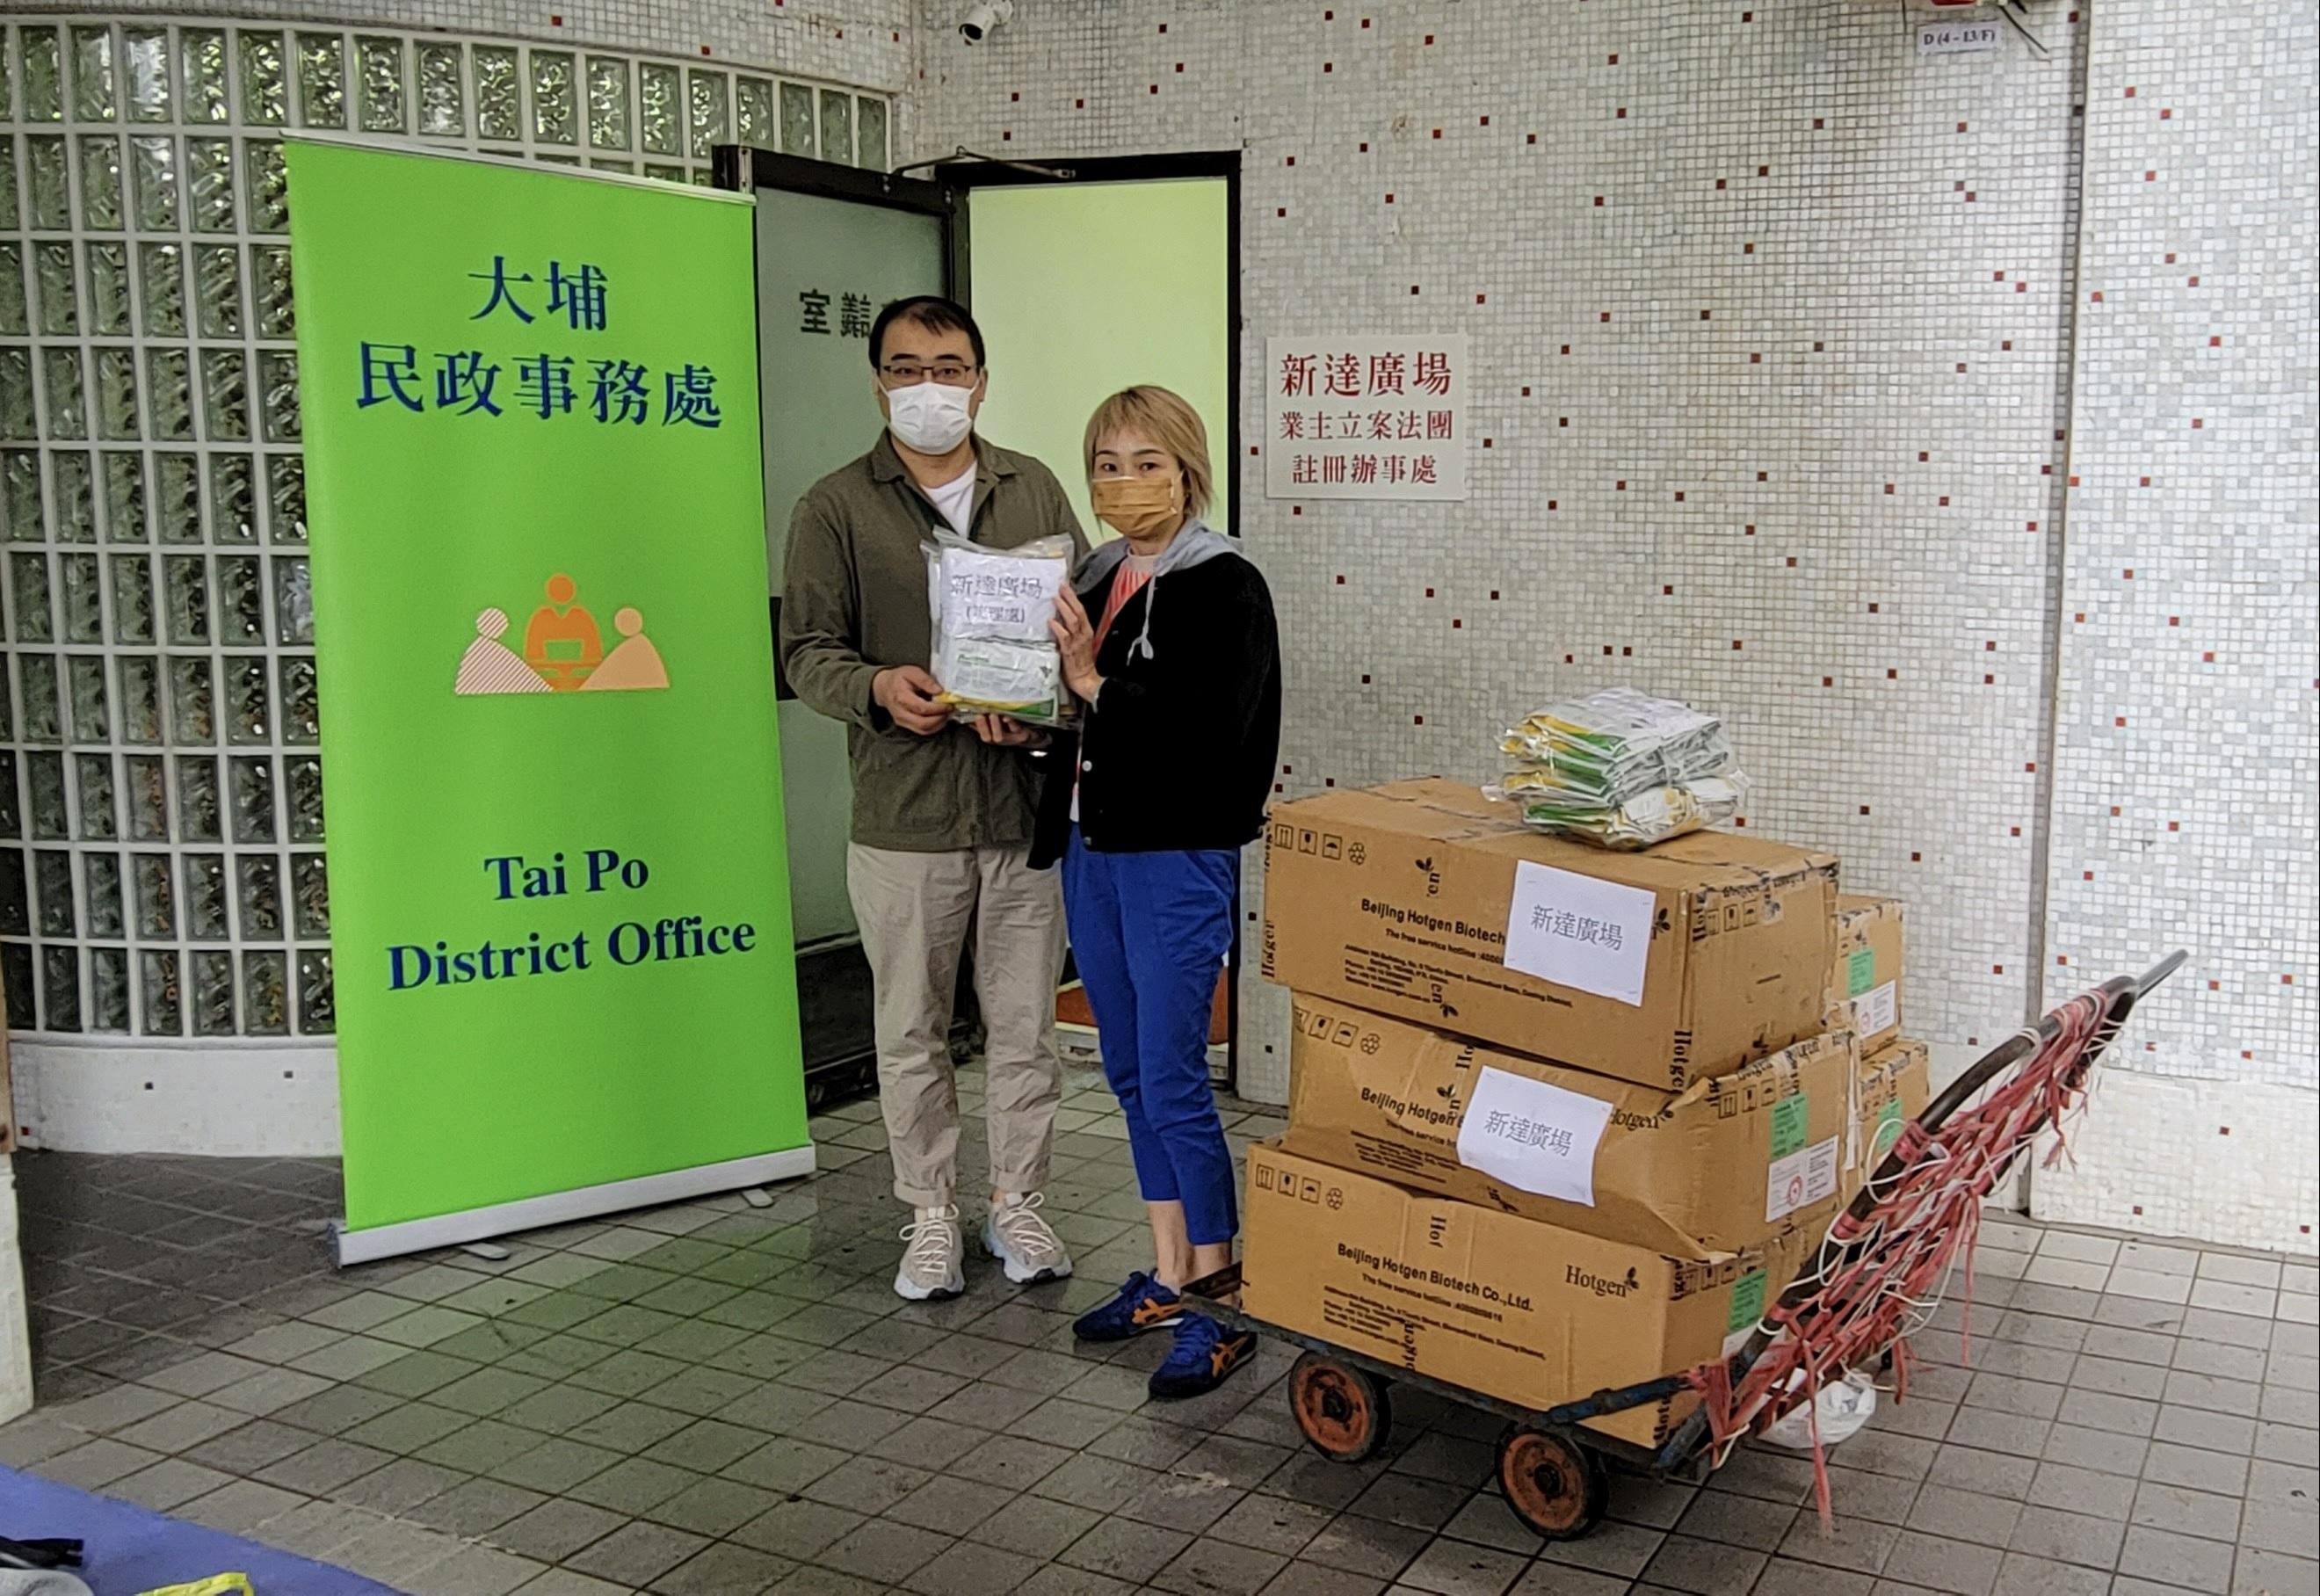 The Tai Po District Office today (March 23) distributed COVID-19 rapid test kits to households, cleansing workers and property management staff living and working in Uptown Plaza for voluntary testing through the property management company.
